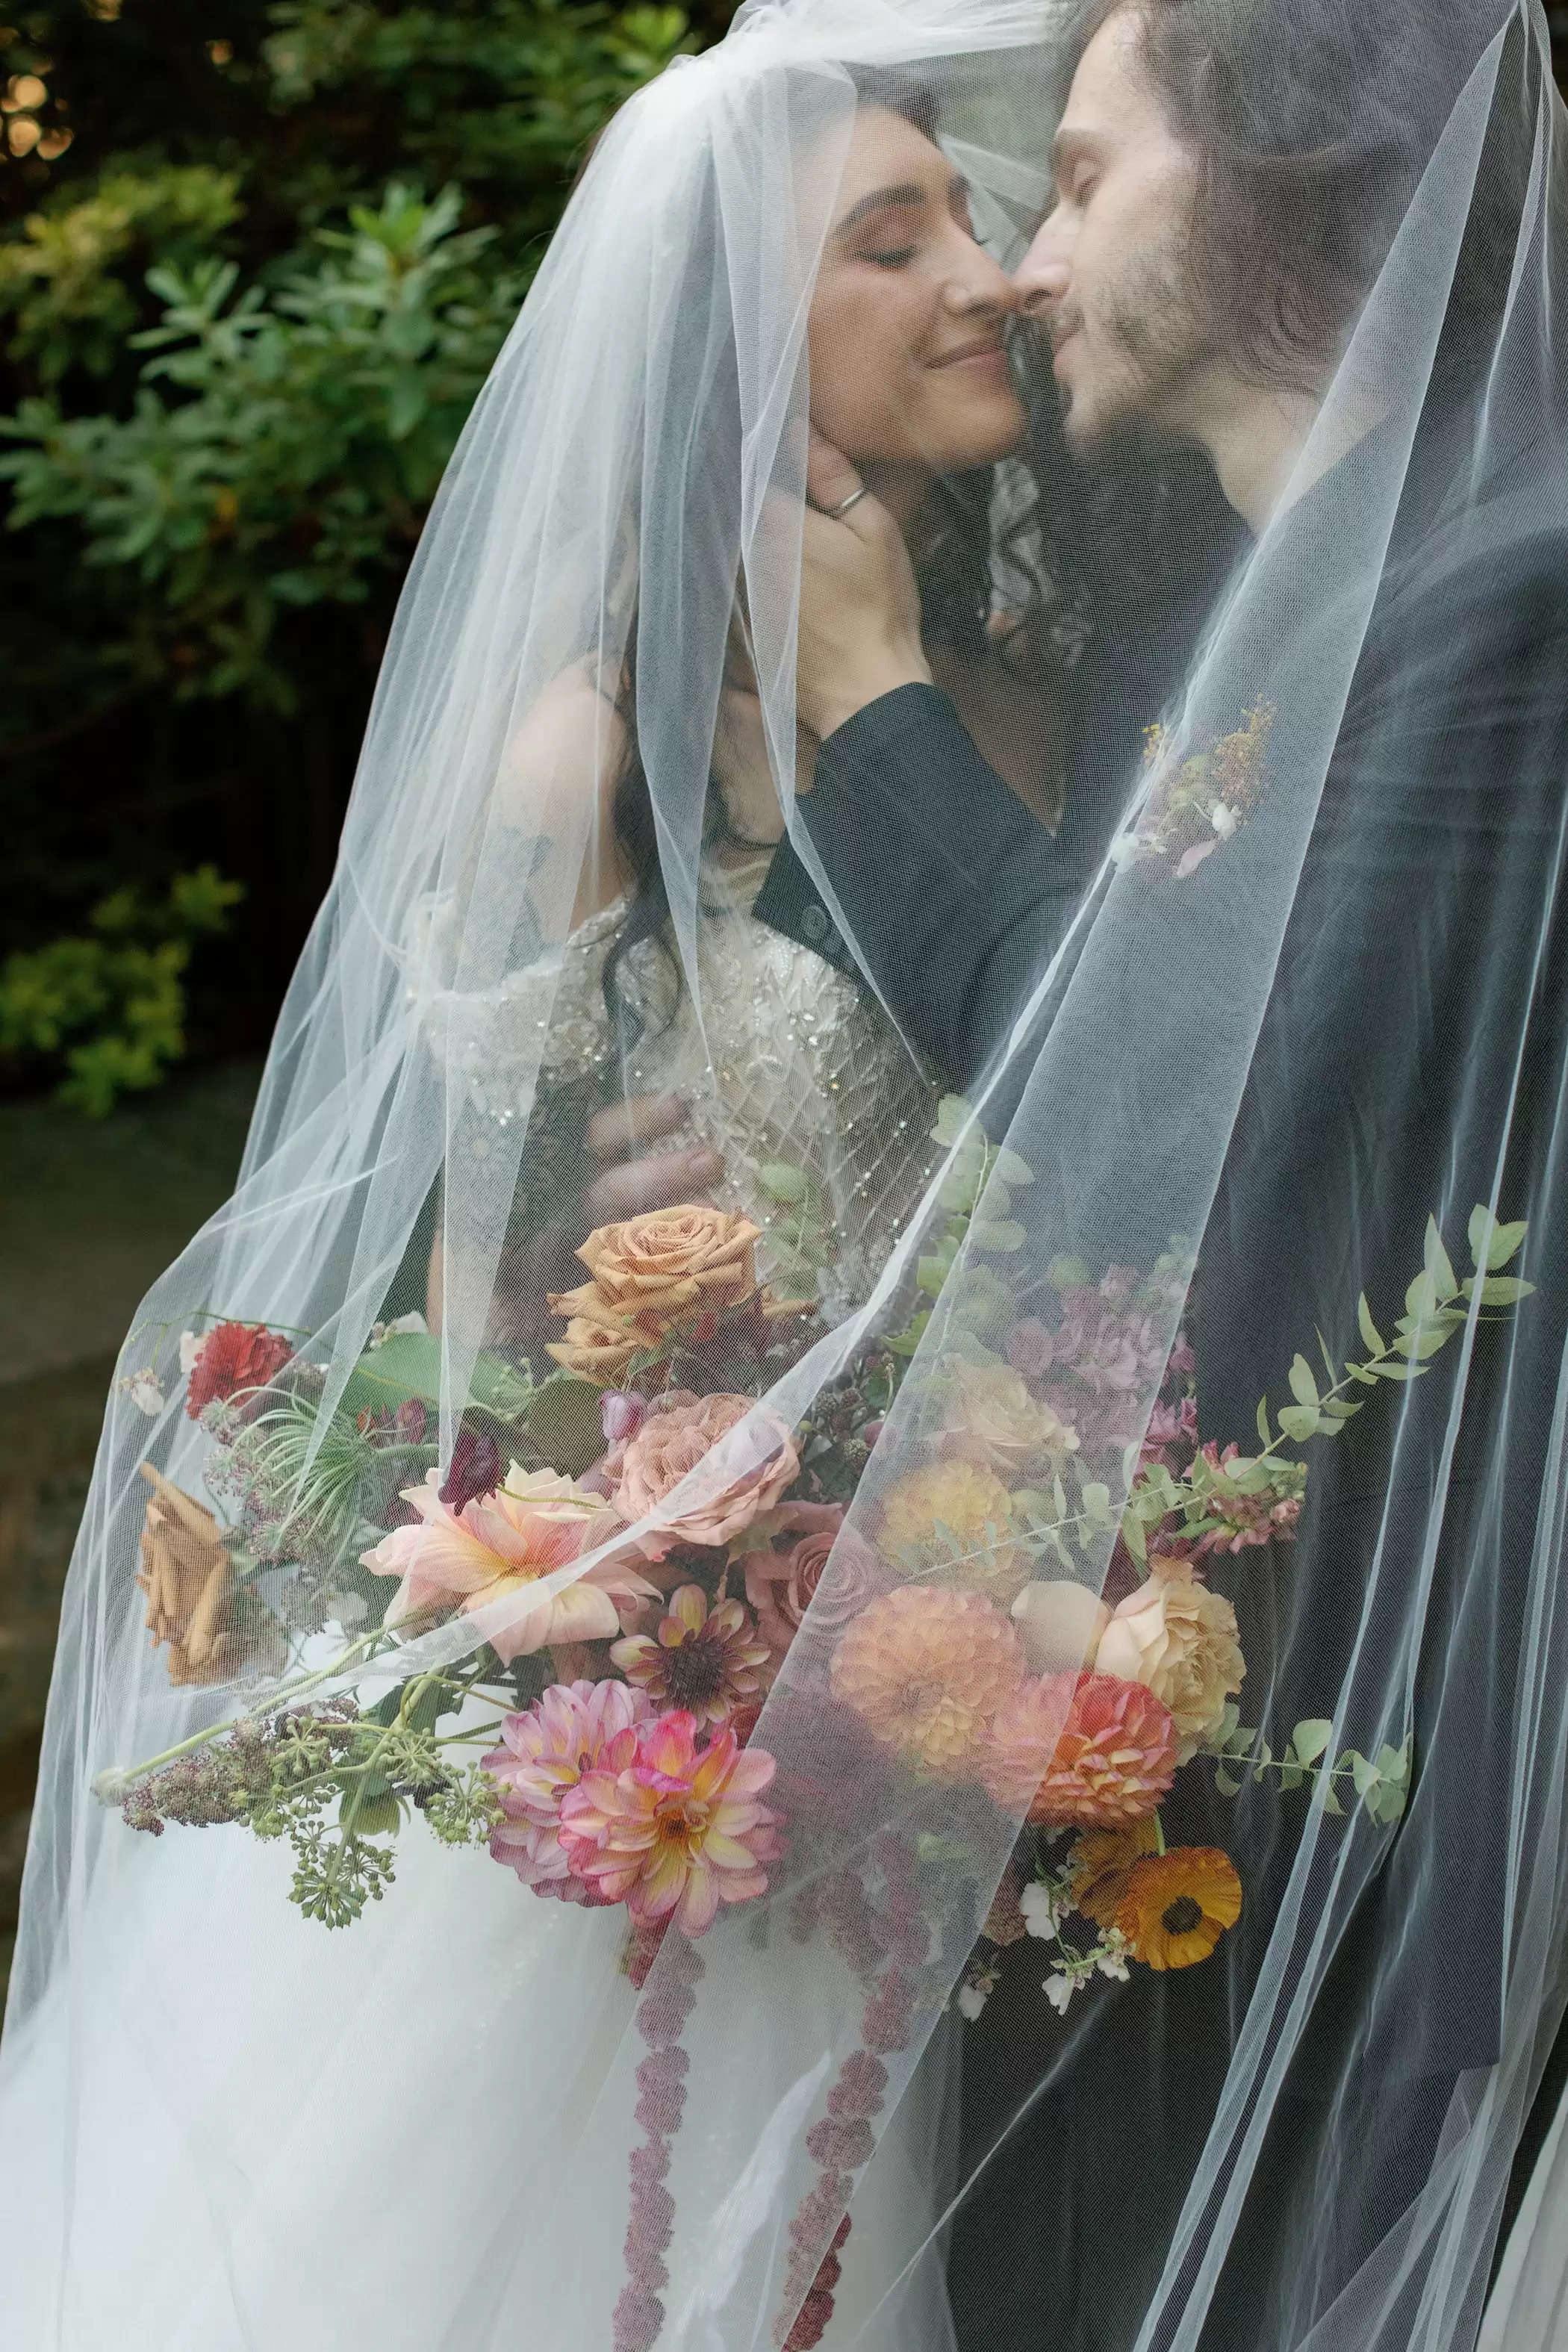 Ethereal Class + Edge for Two DJs' Fall Fairytale Wedding ceremony